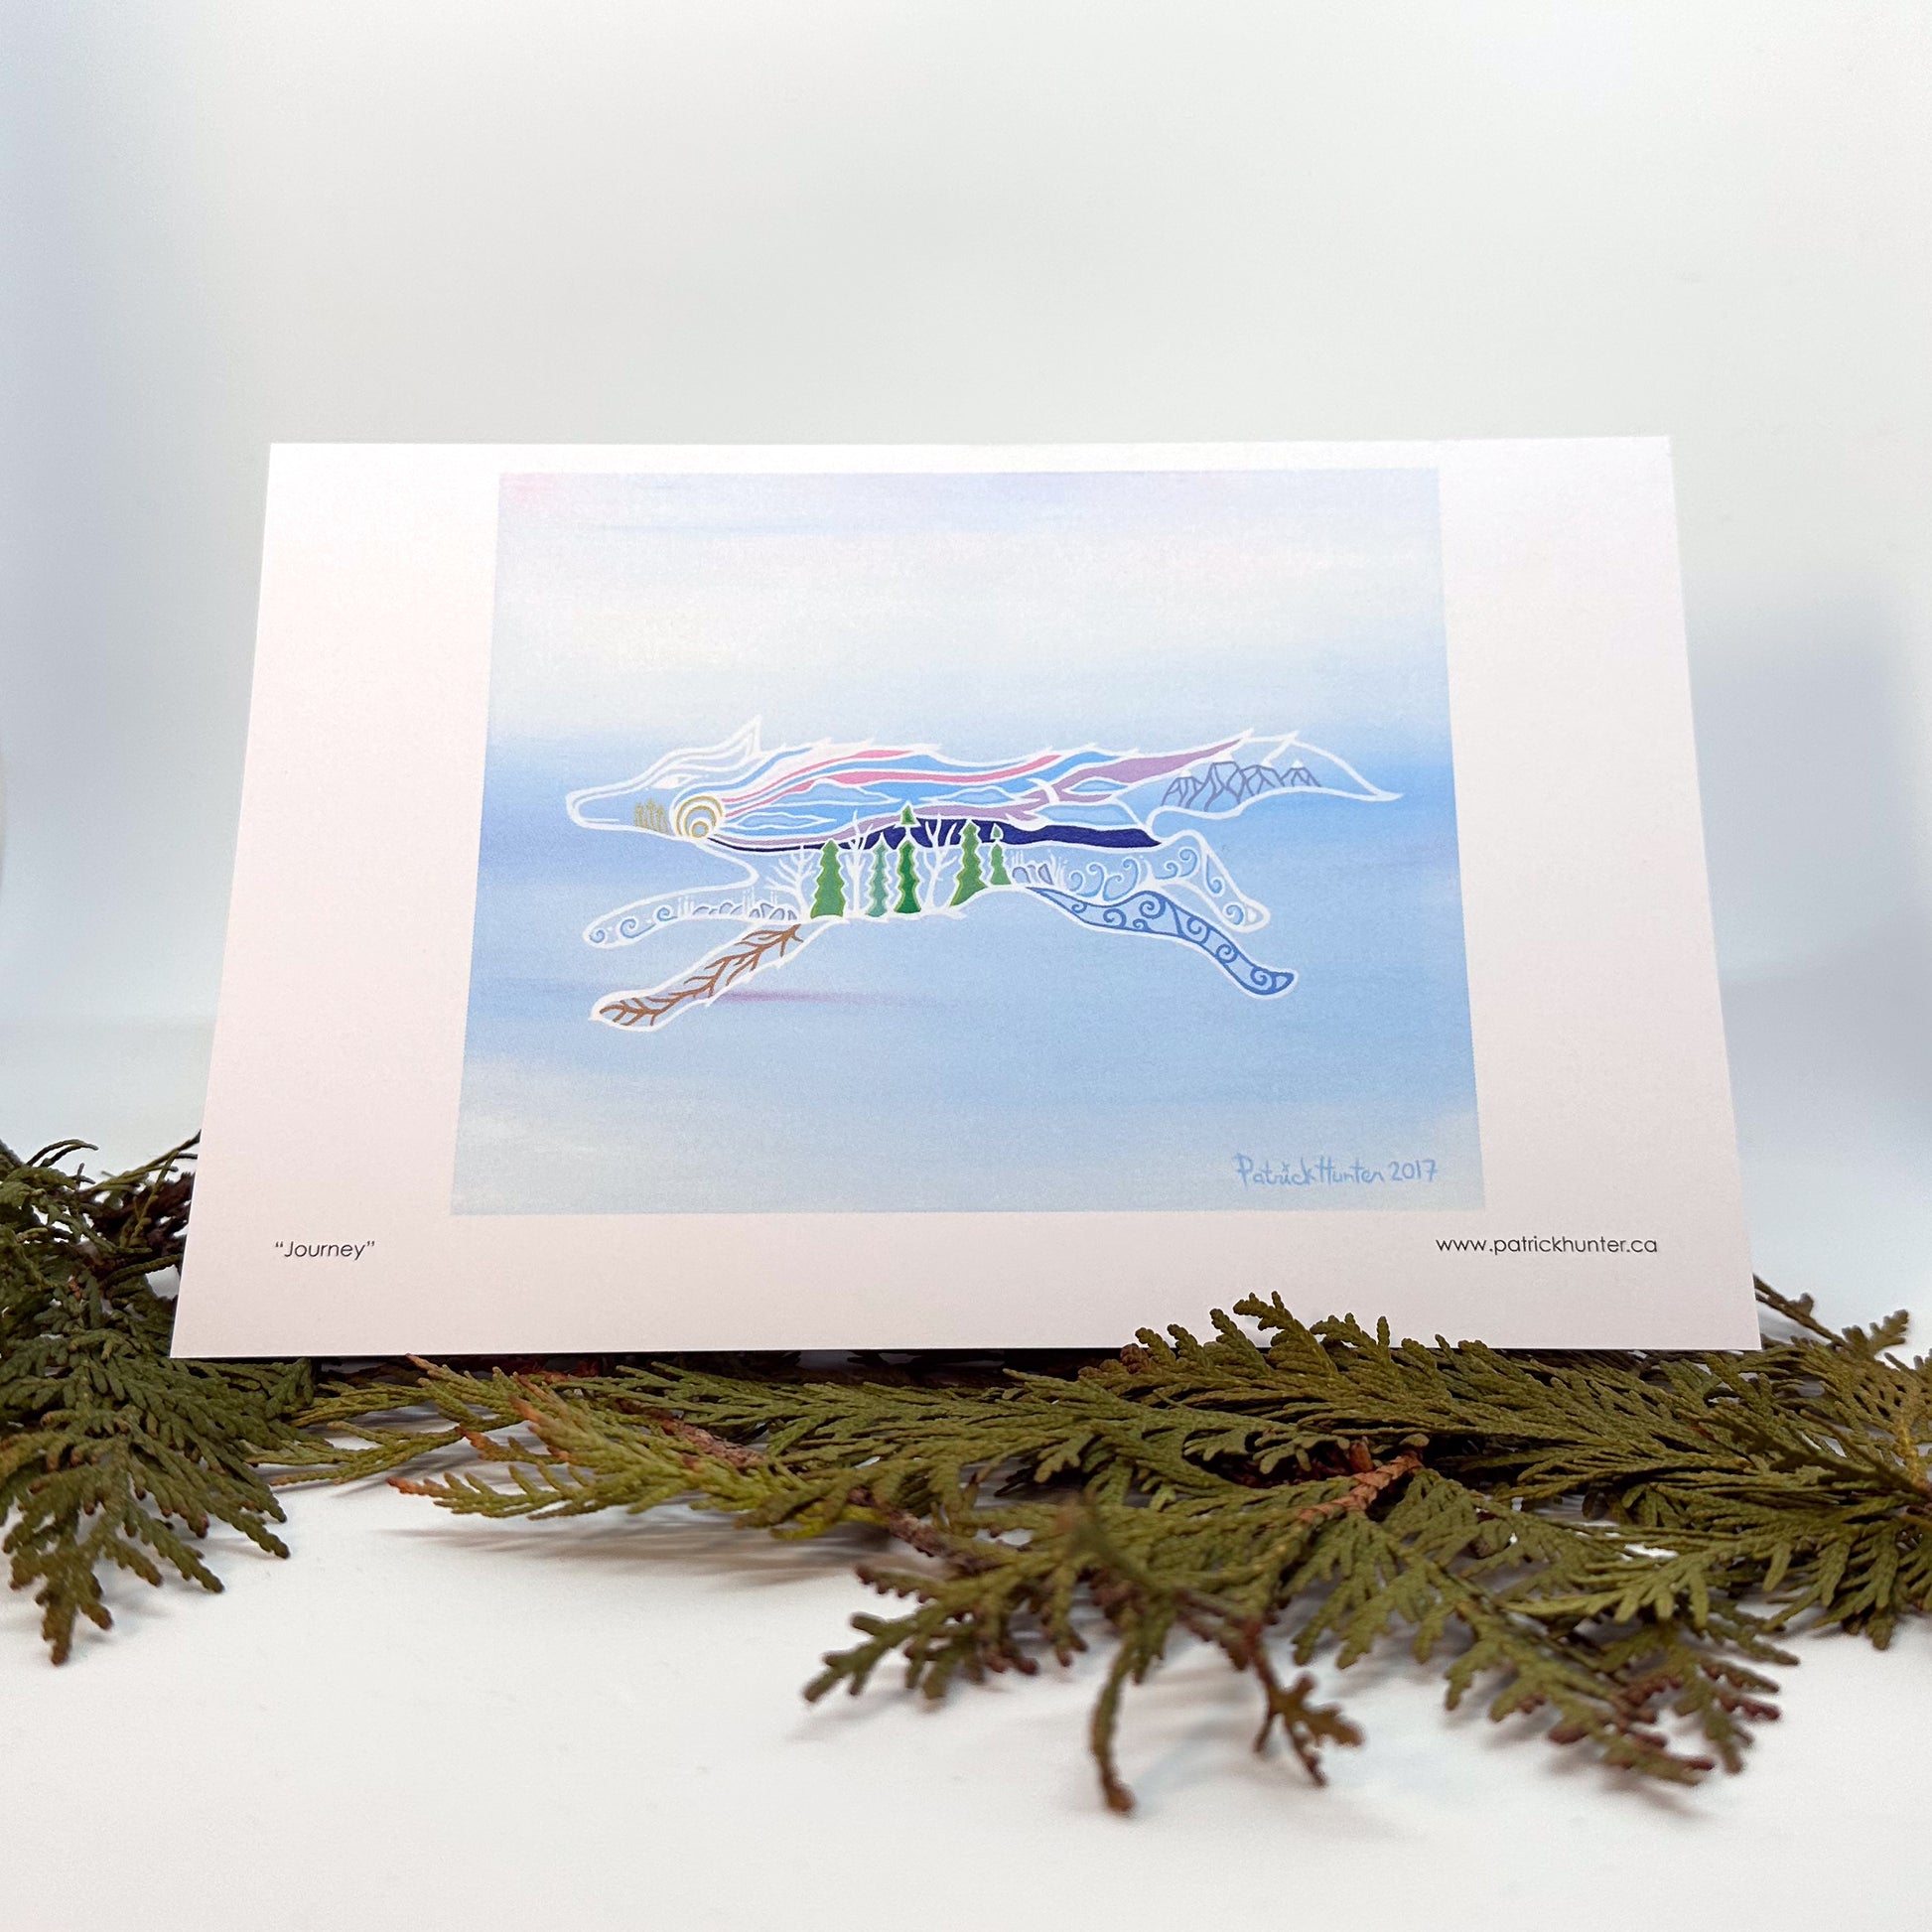 Patrick's artwork, Journey, as a greeting card, standing on cedar boughs.